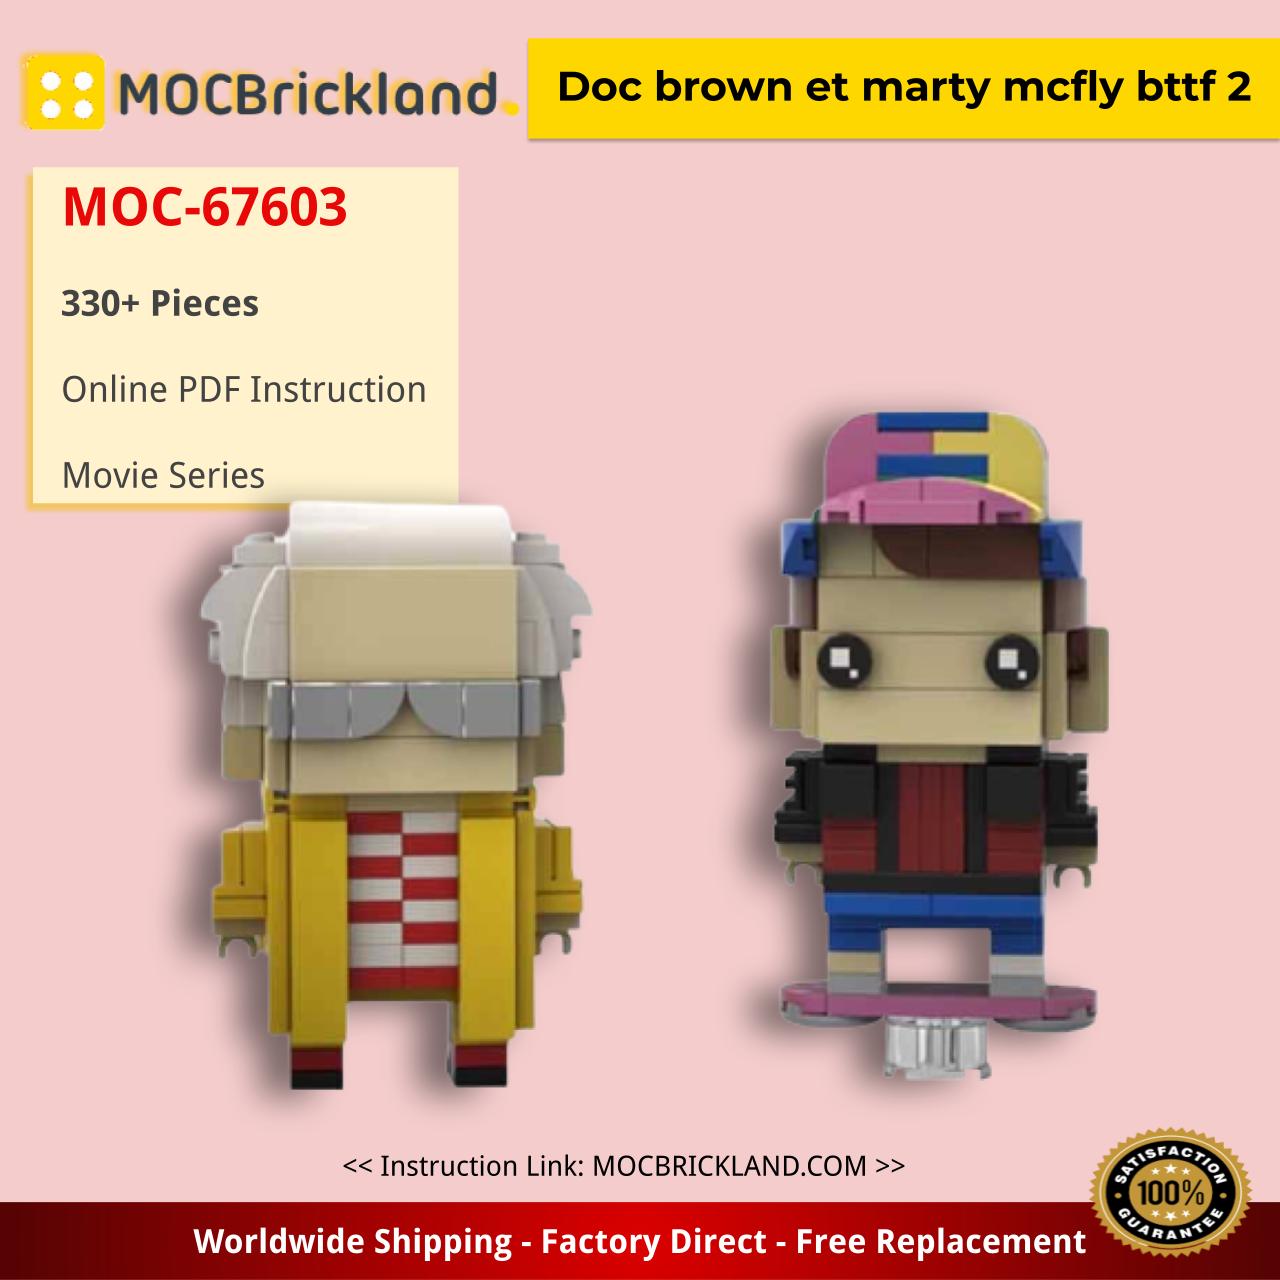 Doc brown et marty mcfly bttf 2 Movie MOC-67603 by Headsbrick WITH 330 PIECES